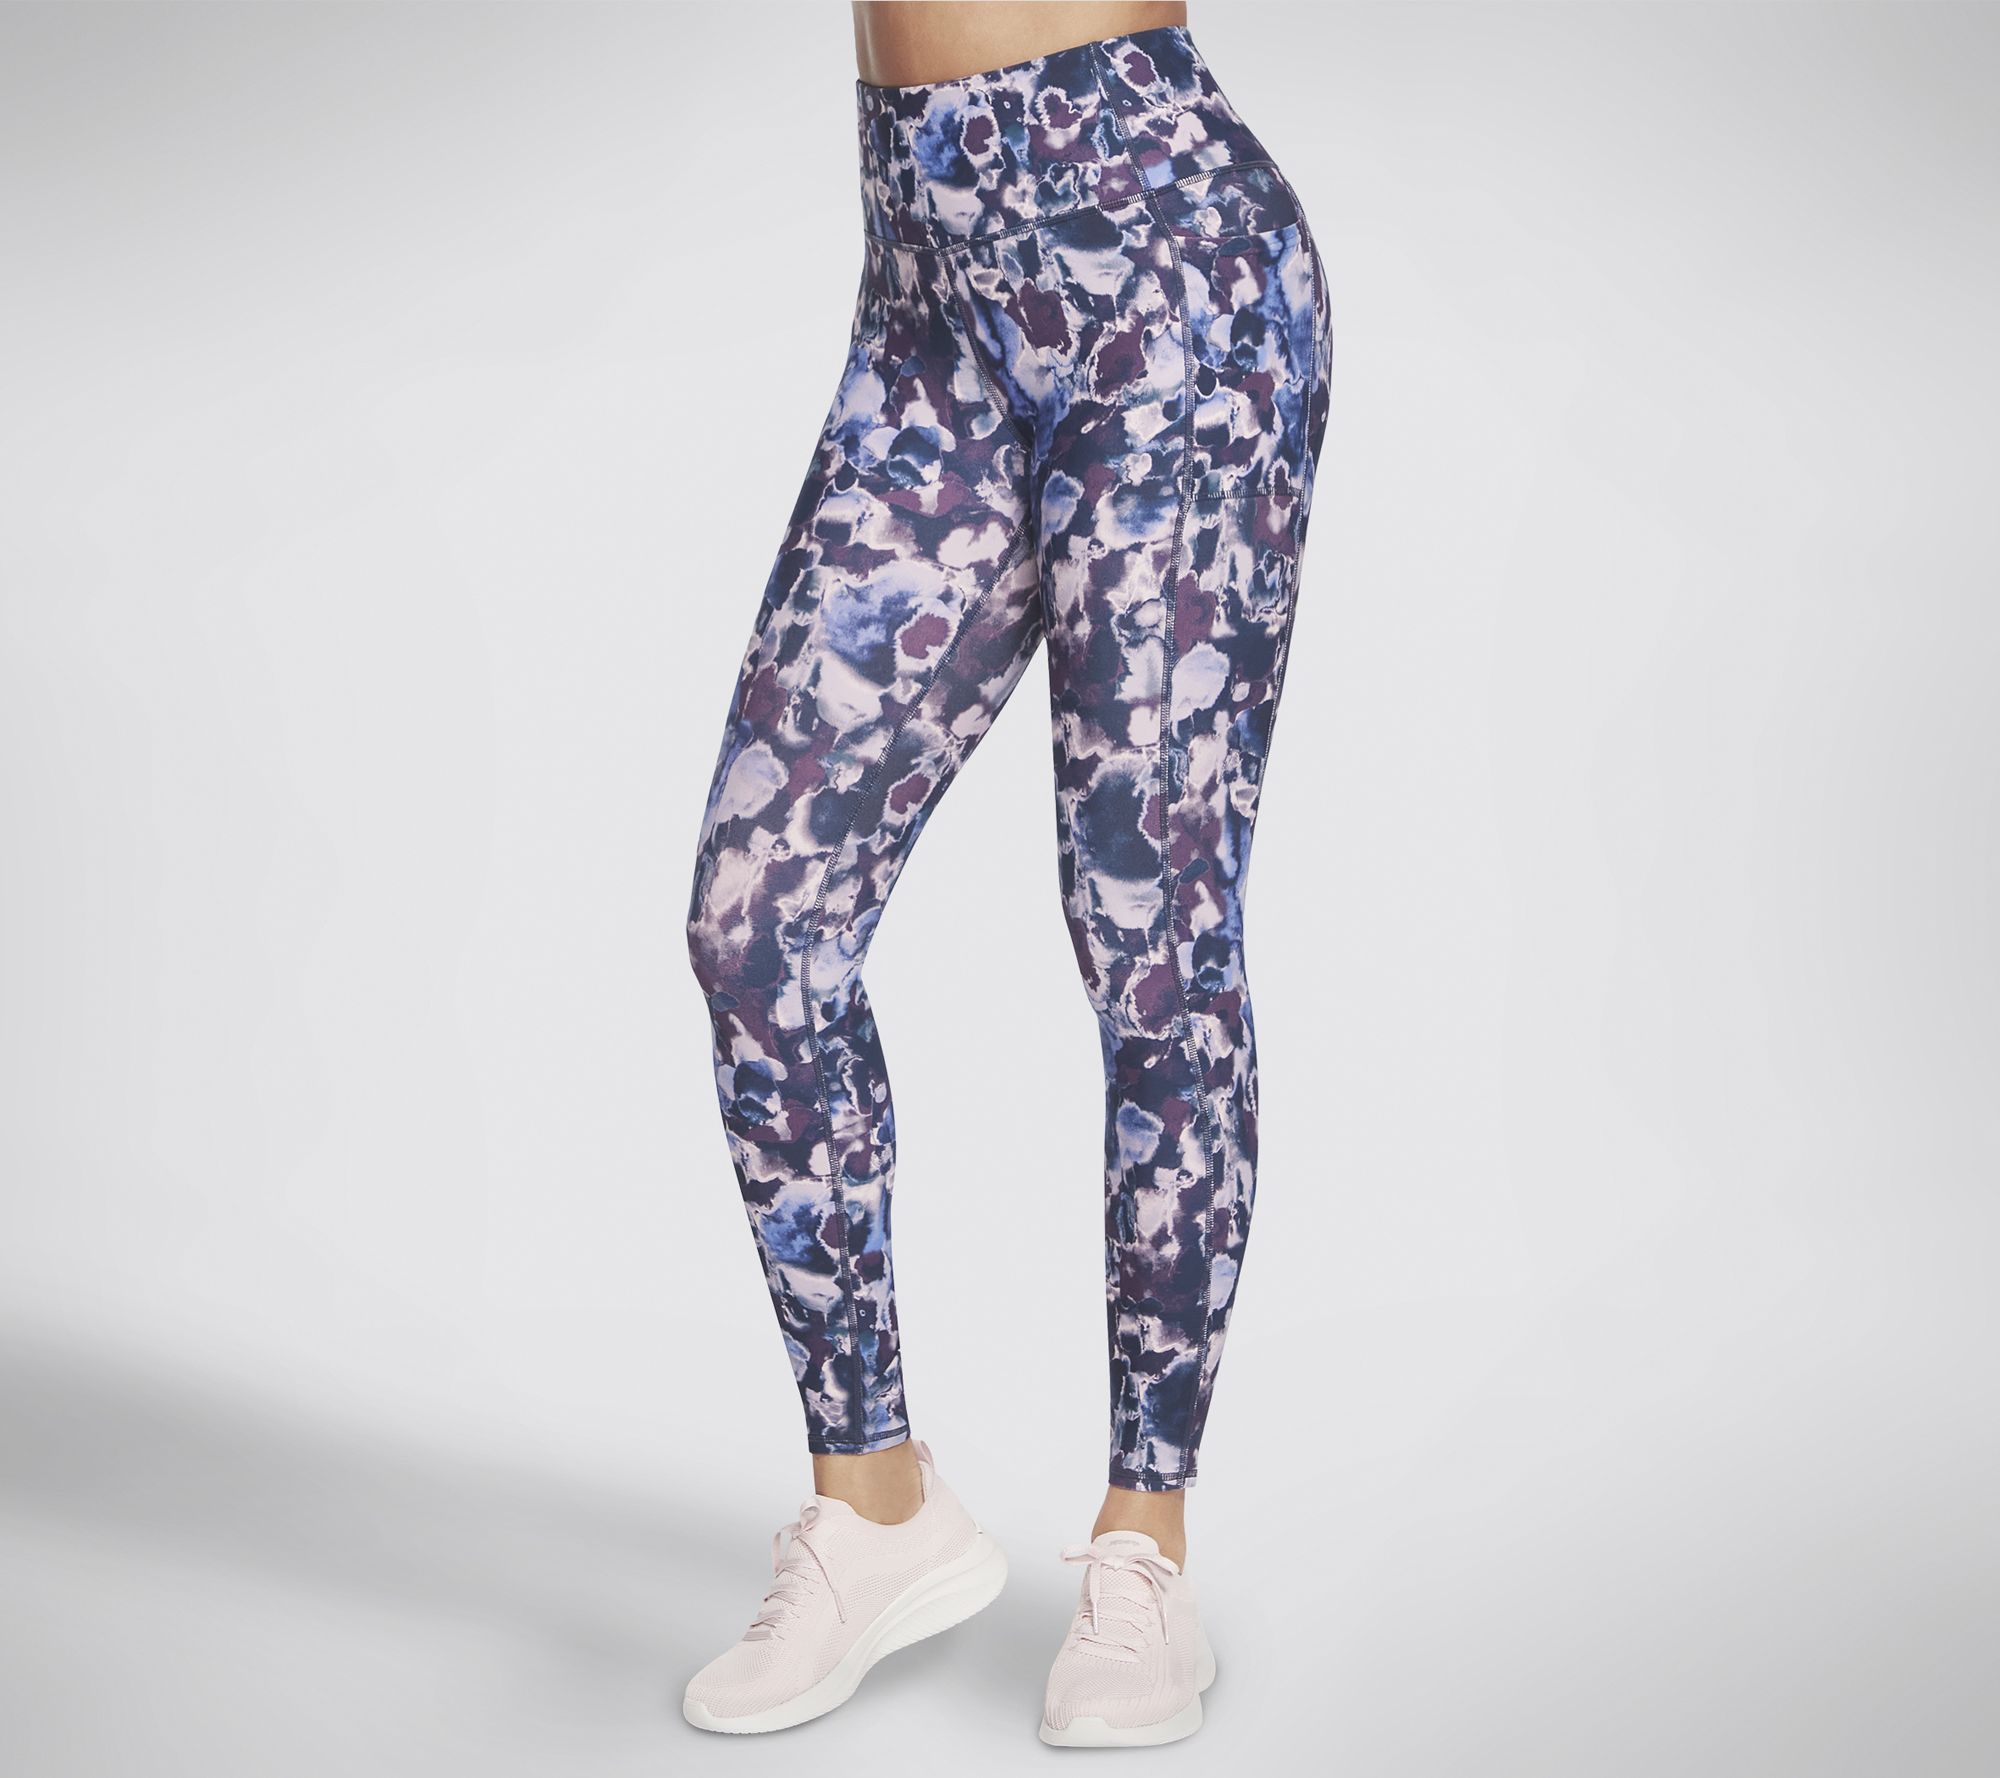 QVC has stylish activewear to kickstart your New Year's resolution